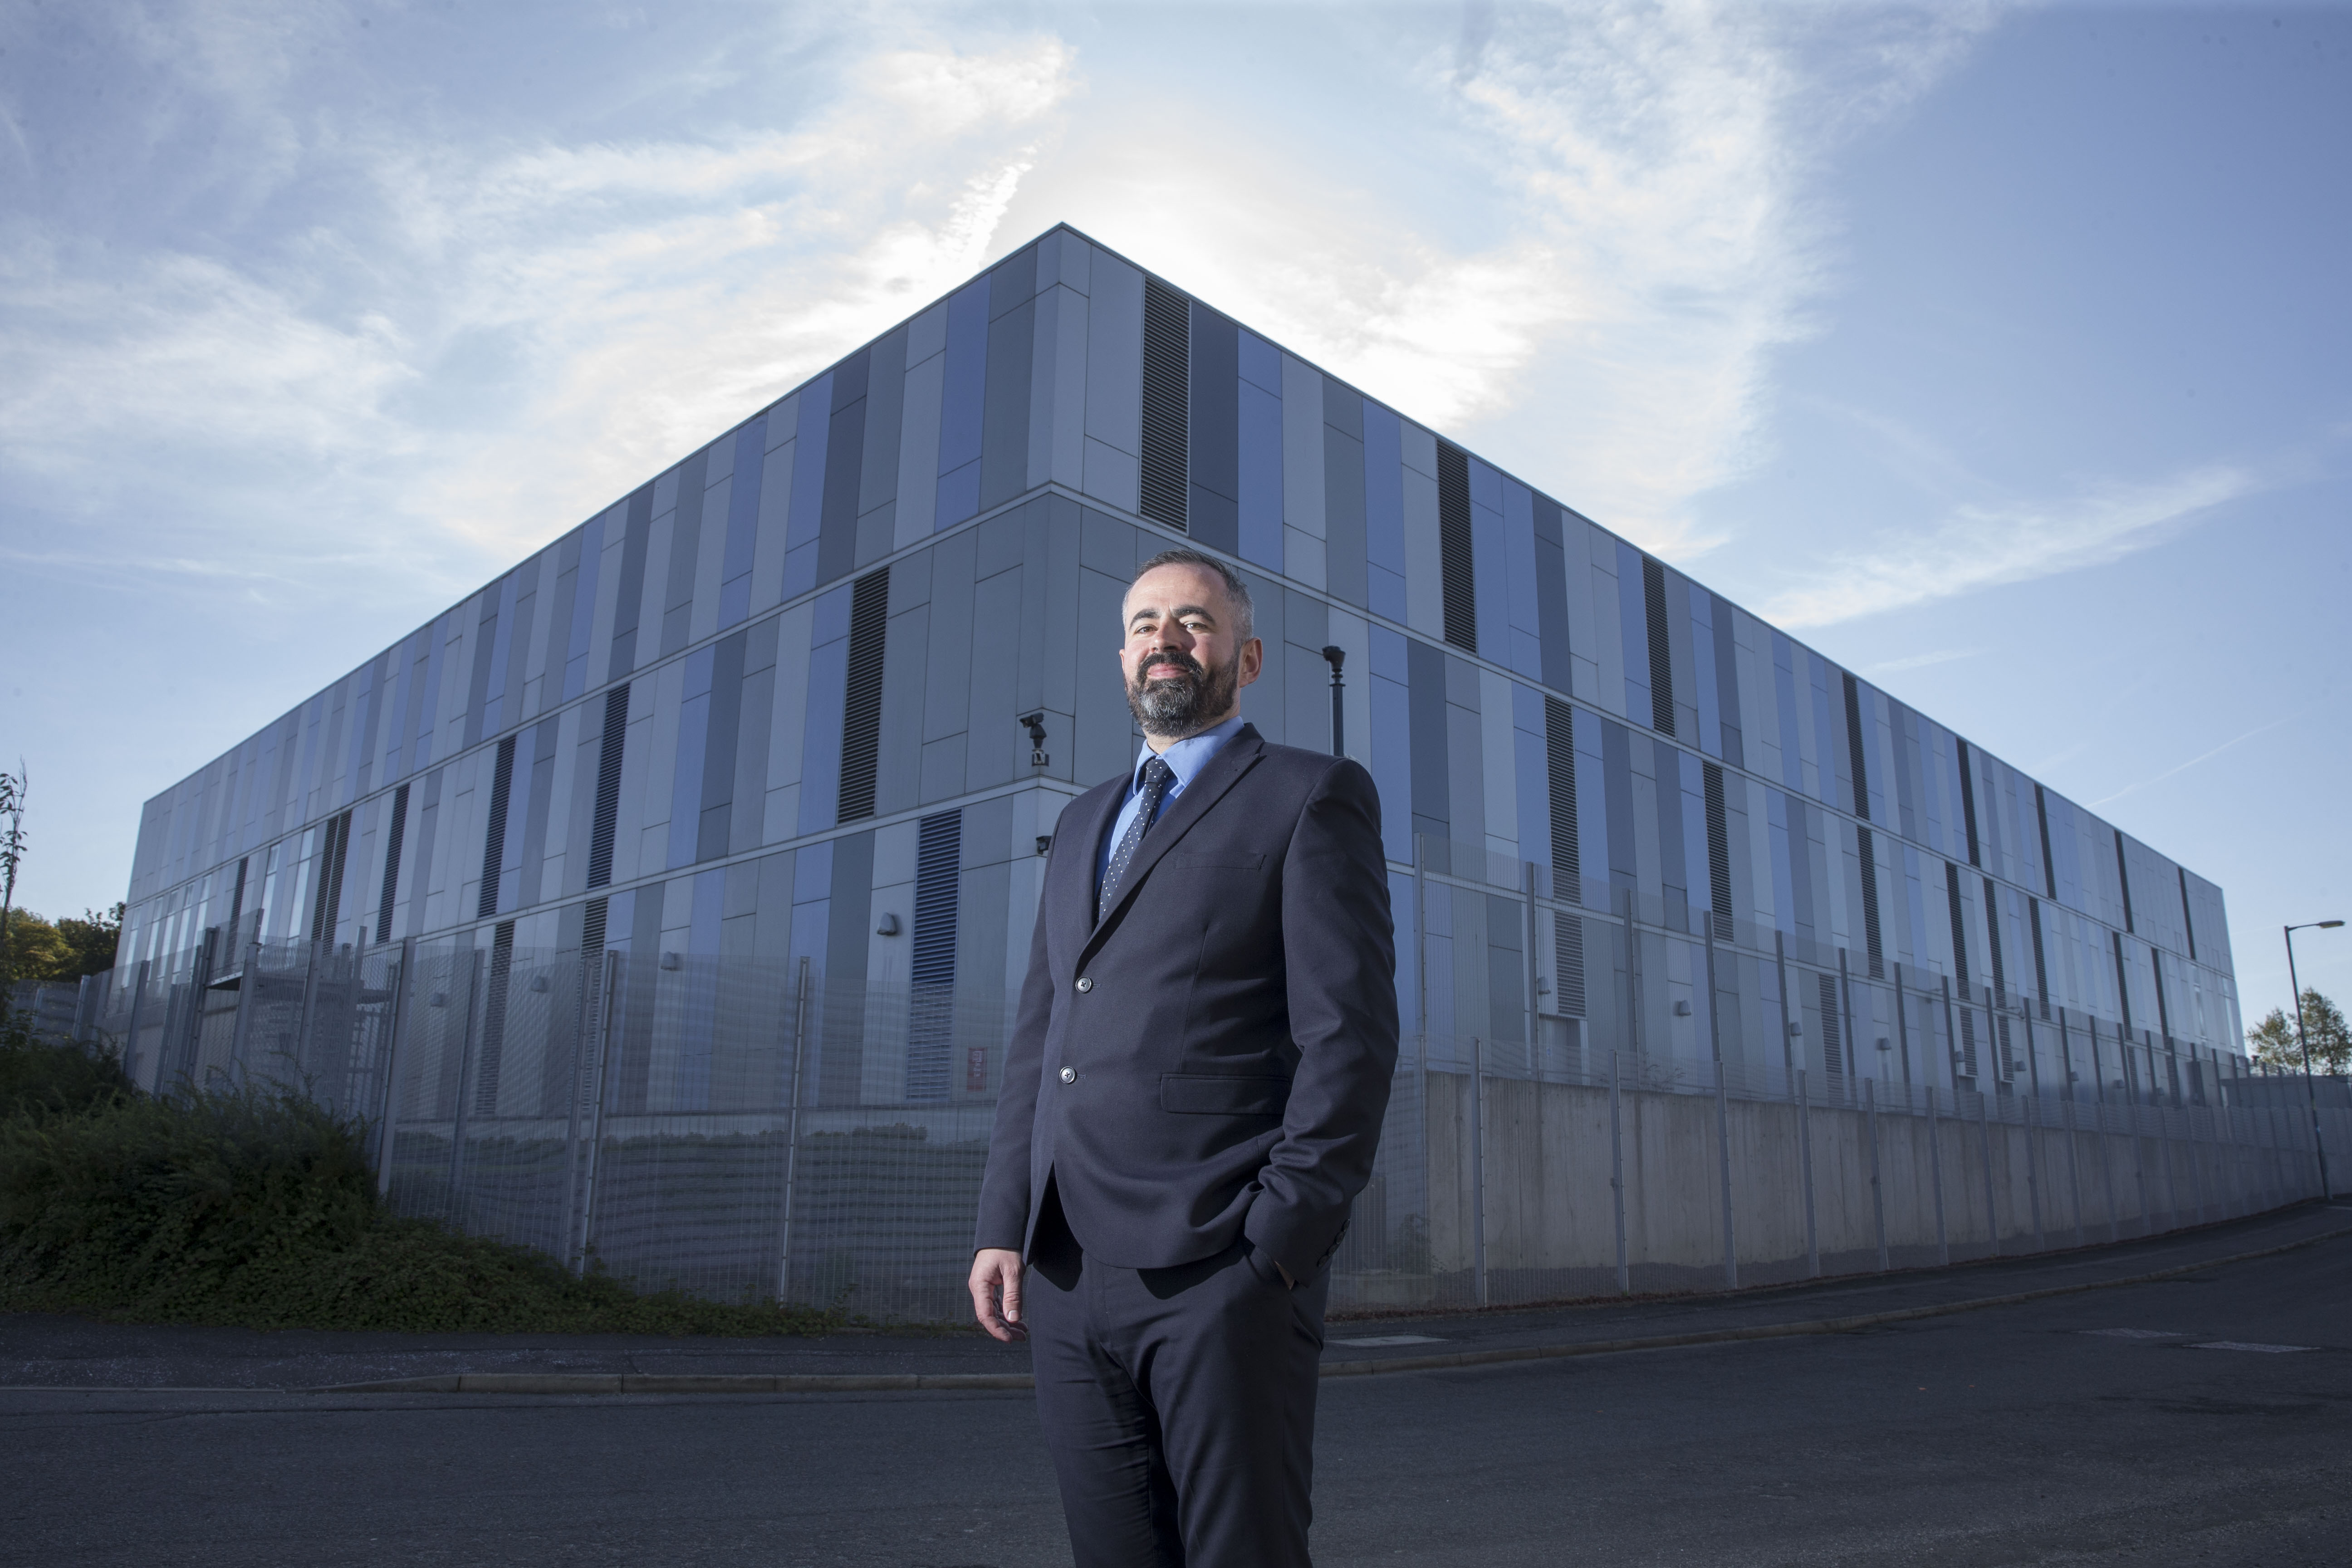 DataVita acquires Fortis data centre with £45 million backing from HFD Group